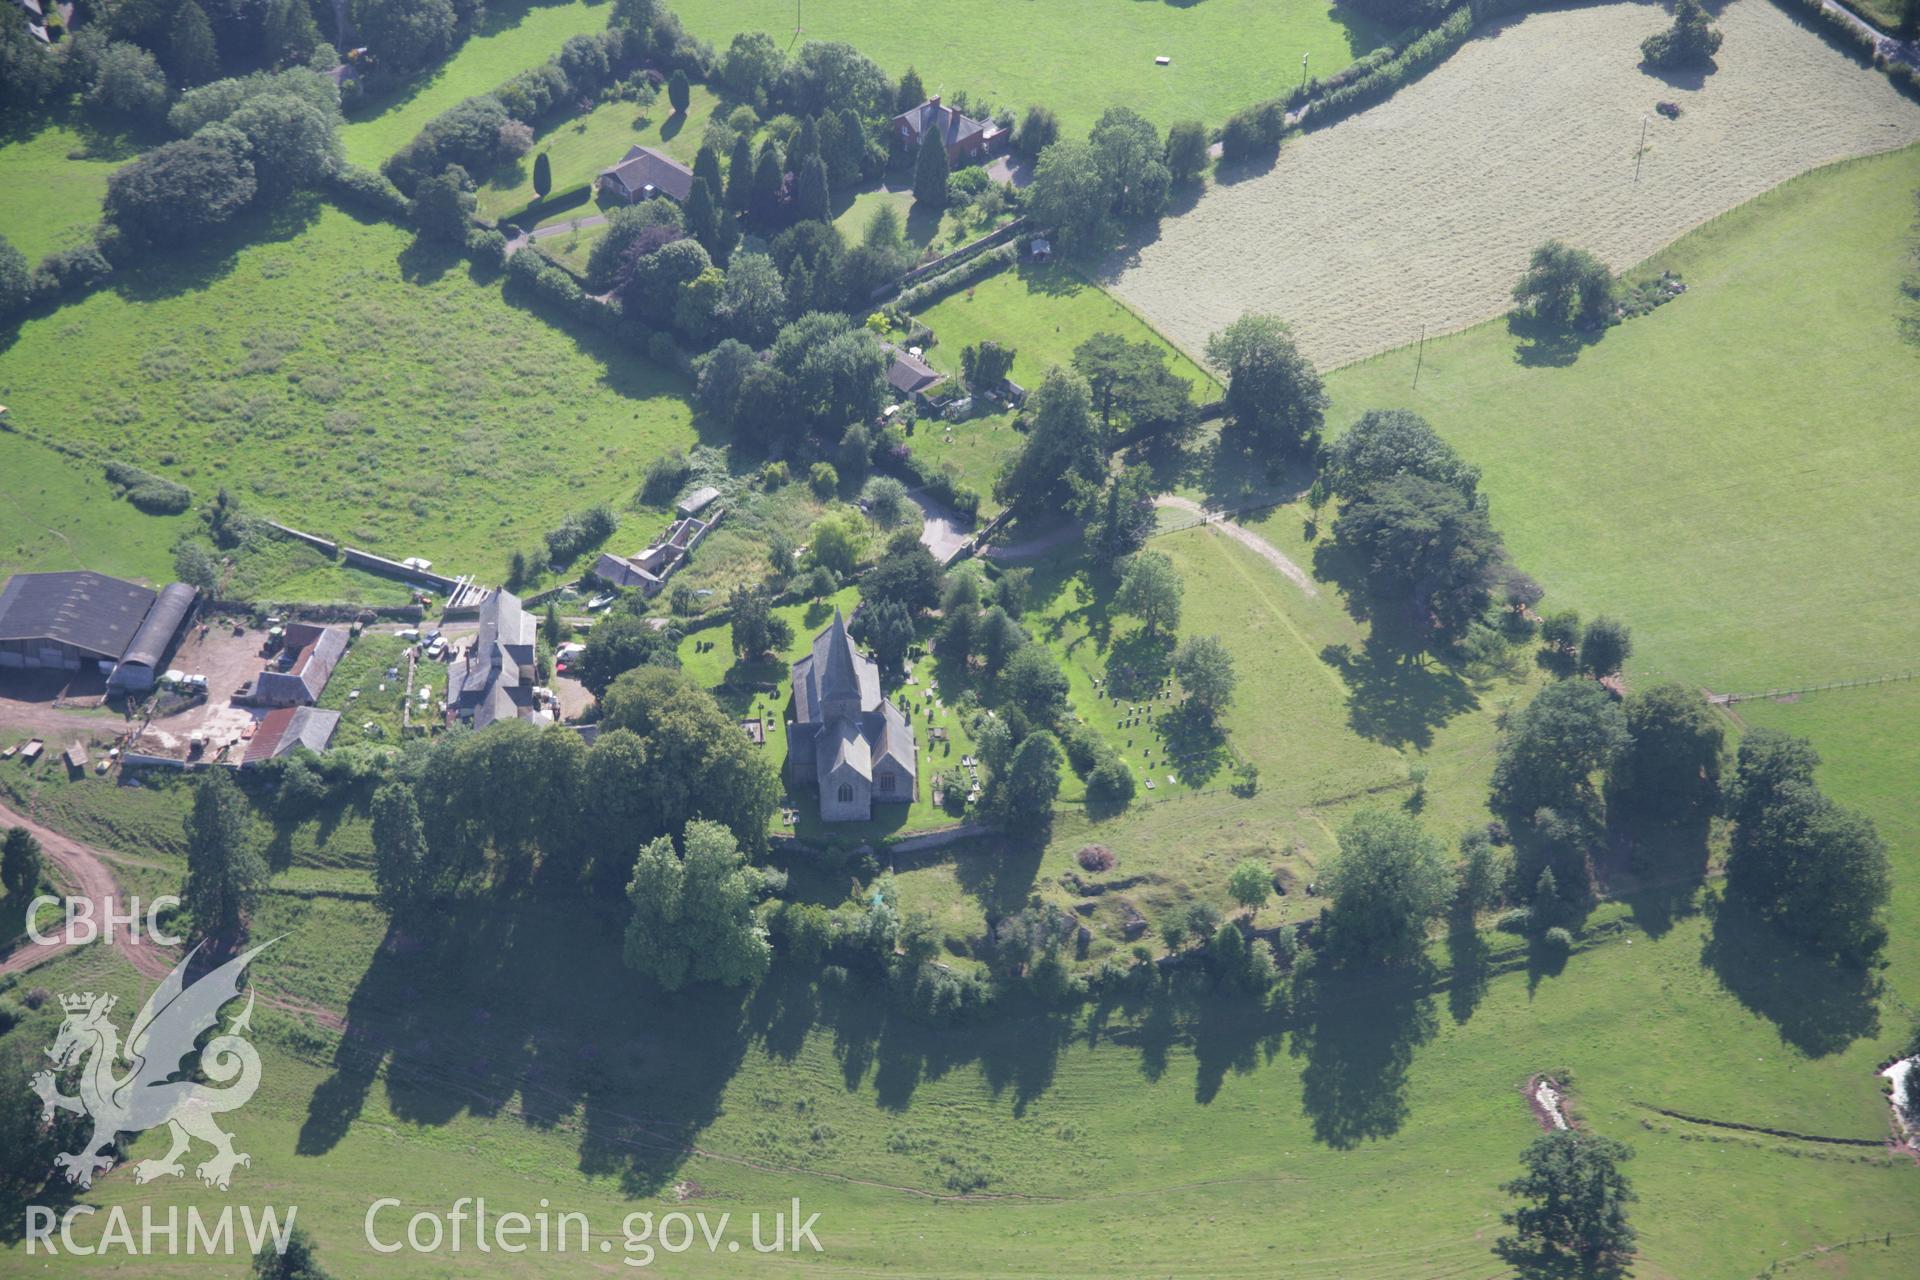 RCAHMW colour oblique aerial photograph of St Teilo's Church, Llantilio Crossenny. Taken on 13 July 2006 by Toby Driver.